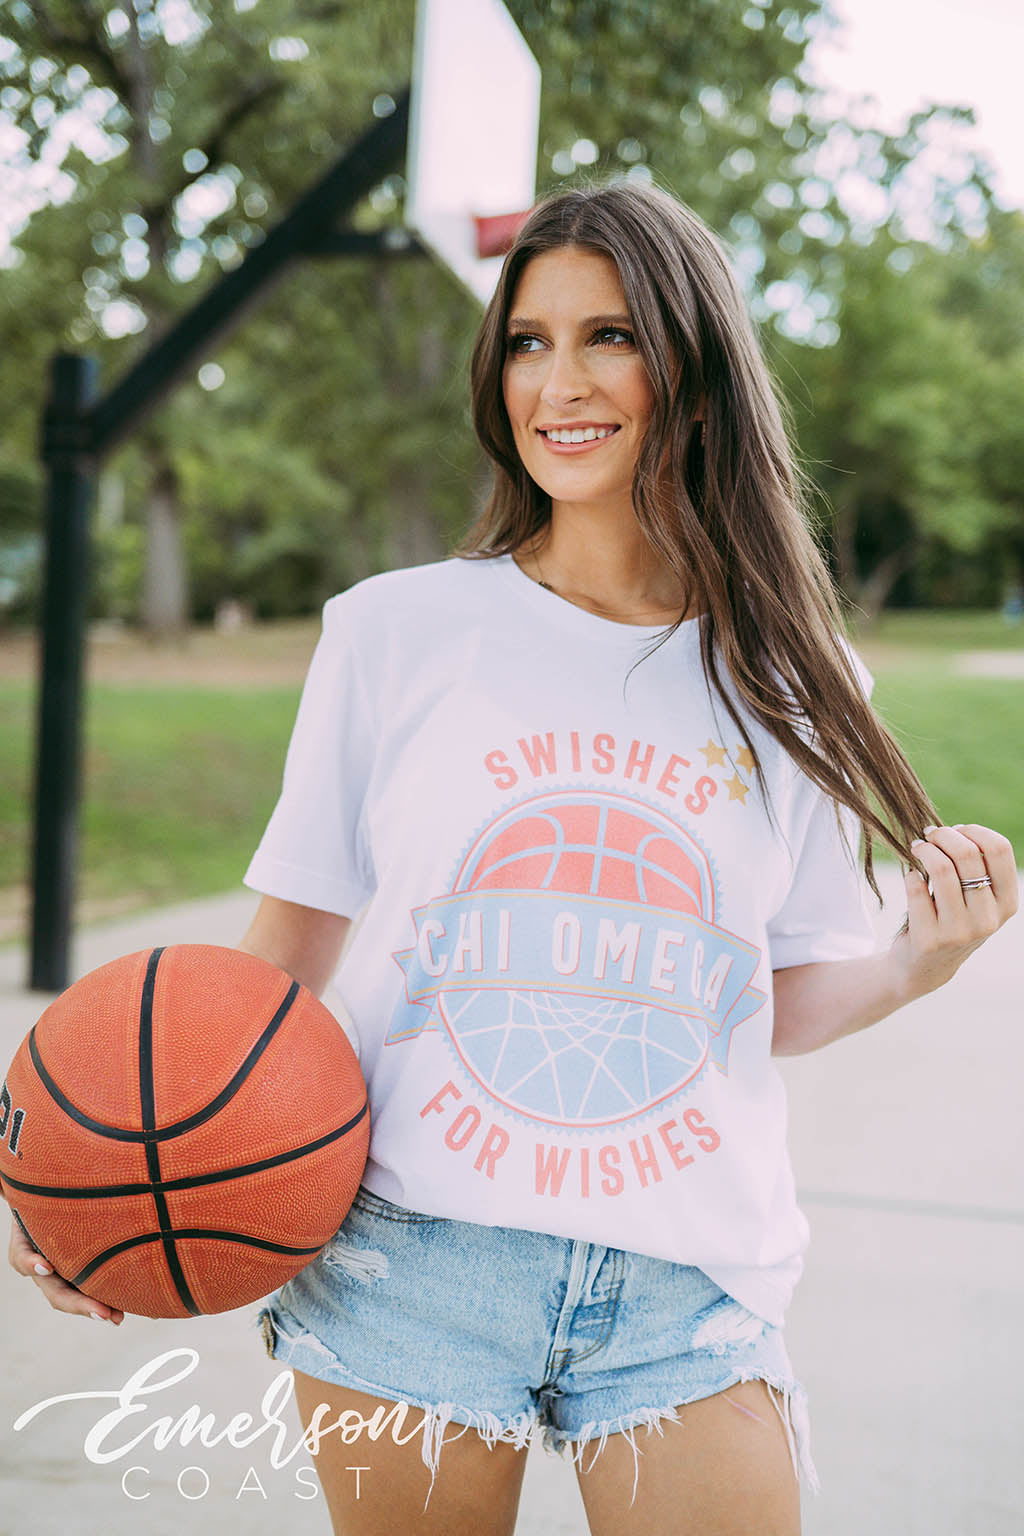 Chi Omega Philanthropy Swishes For Wishes Basketball Tee